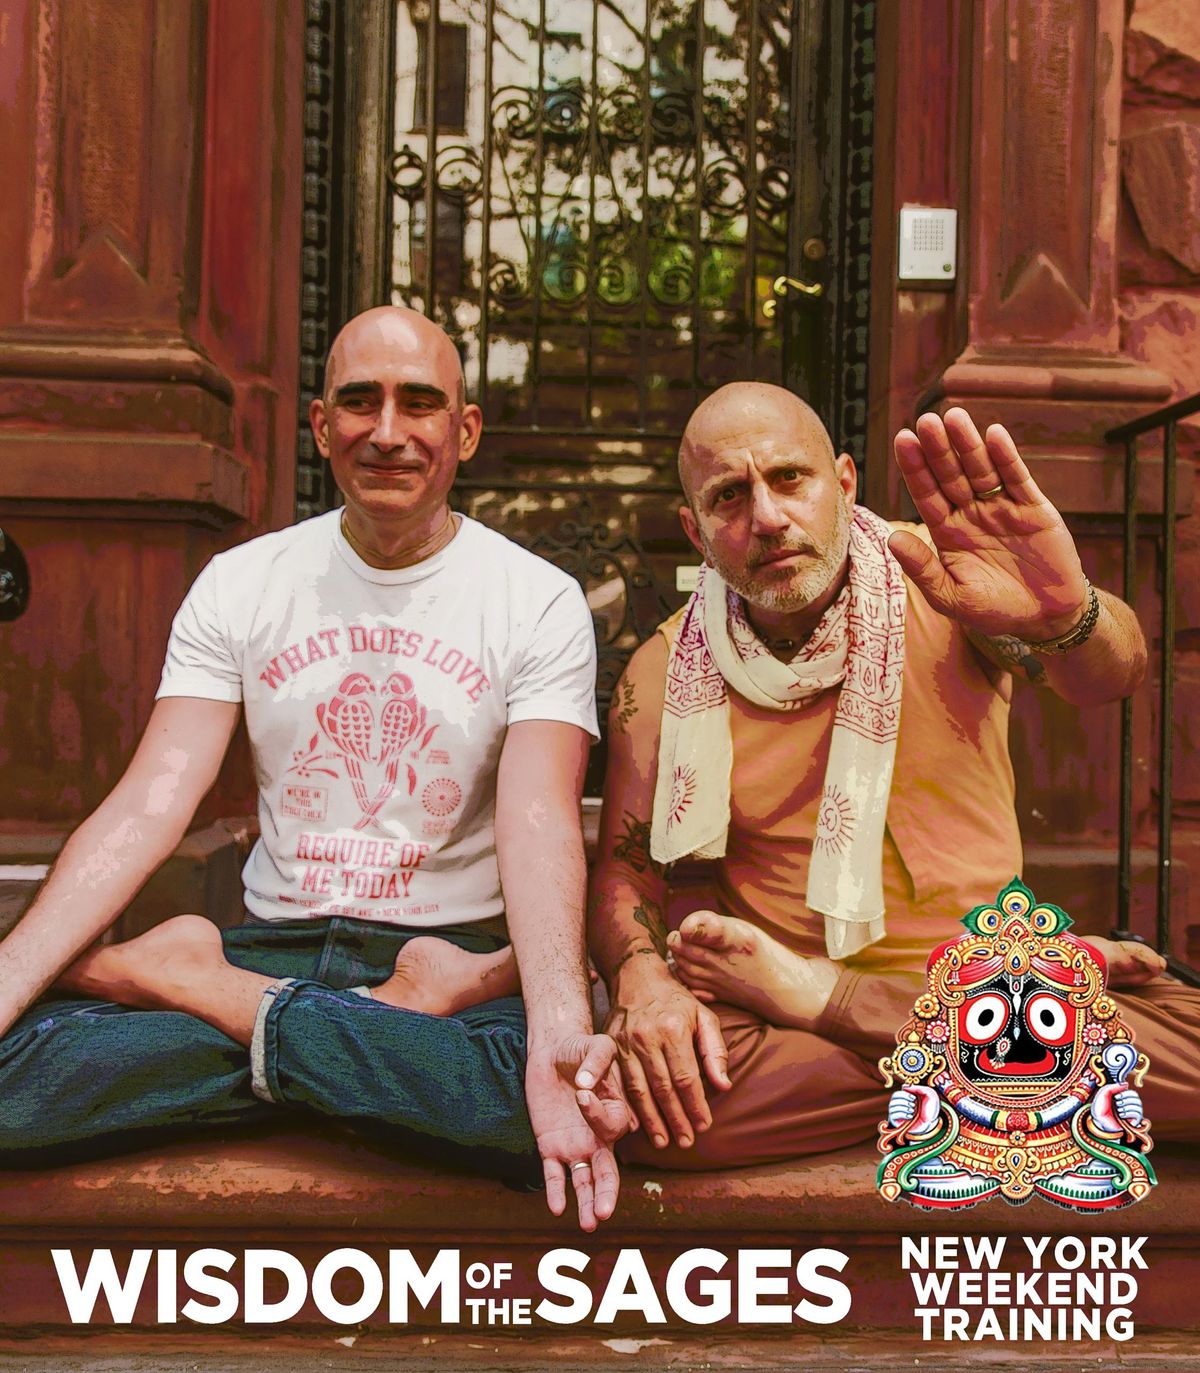 Wisdom of the Sages New York Weekend